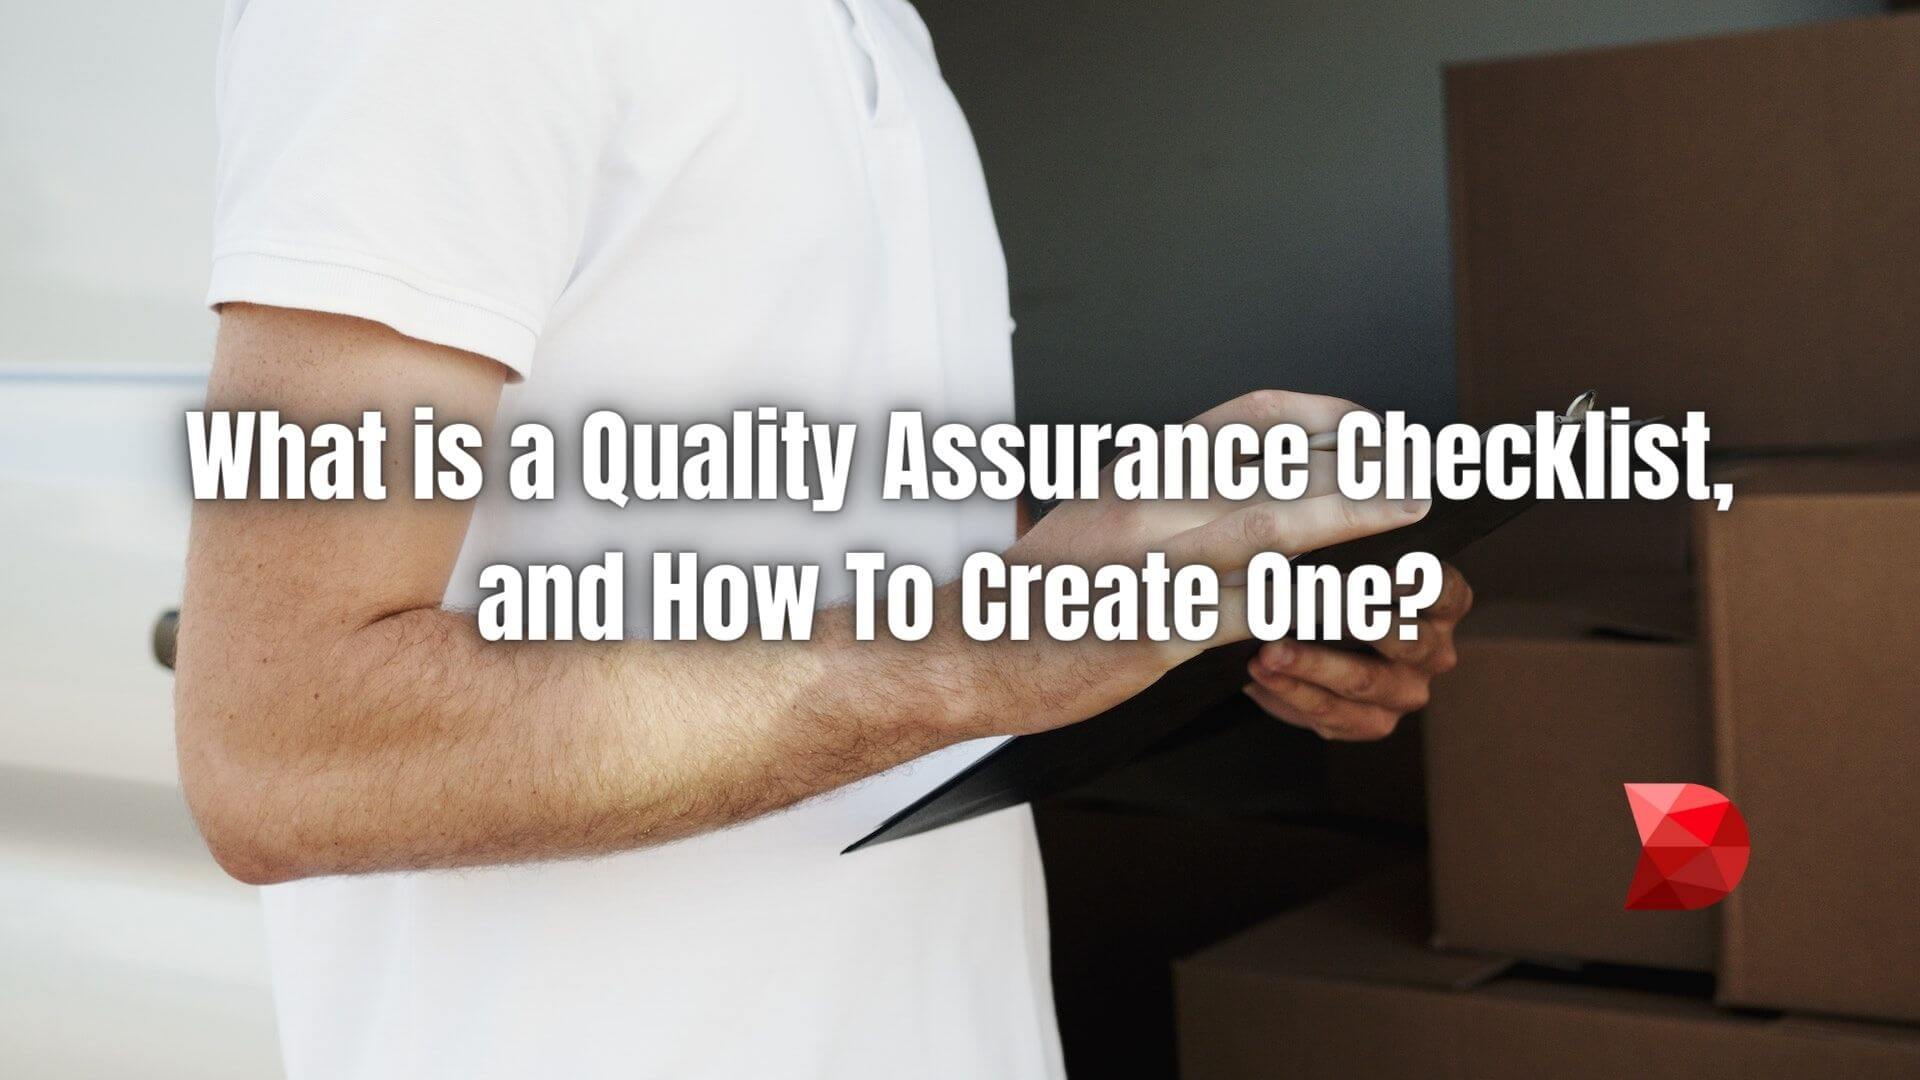 Discover the essentials of creating a potent Quality Assurance Checklist. Click here to learn how to create one for robust quality control.